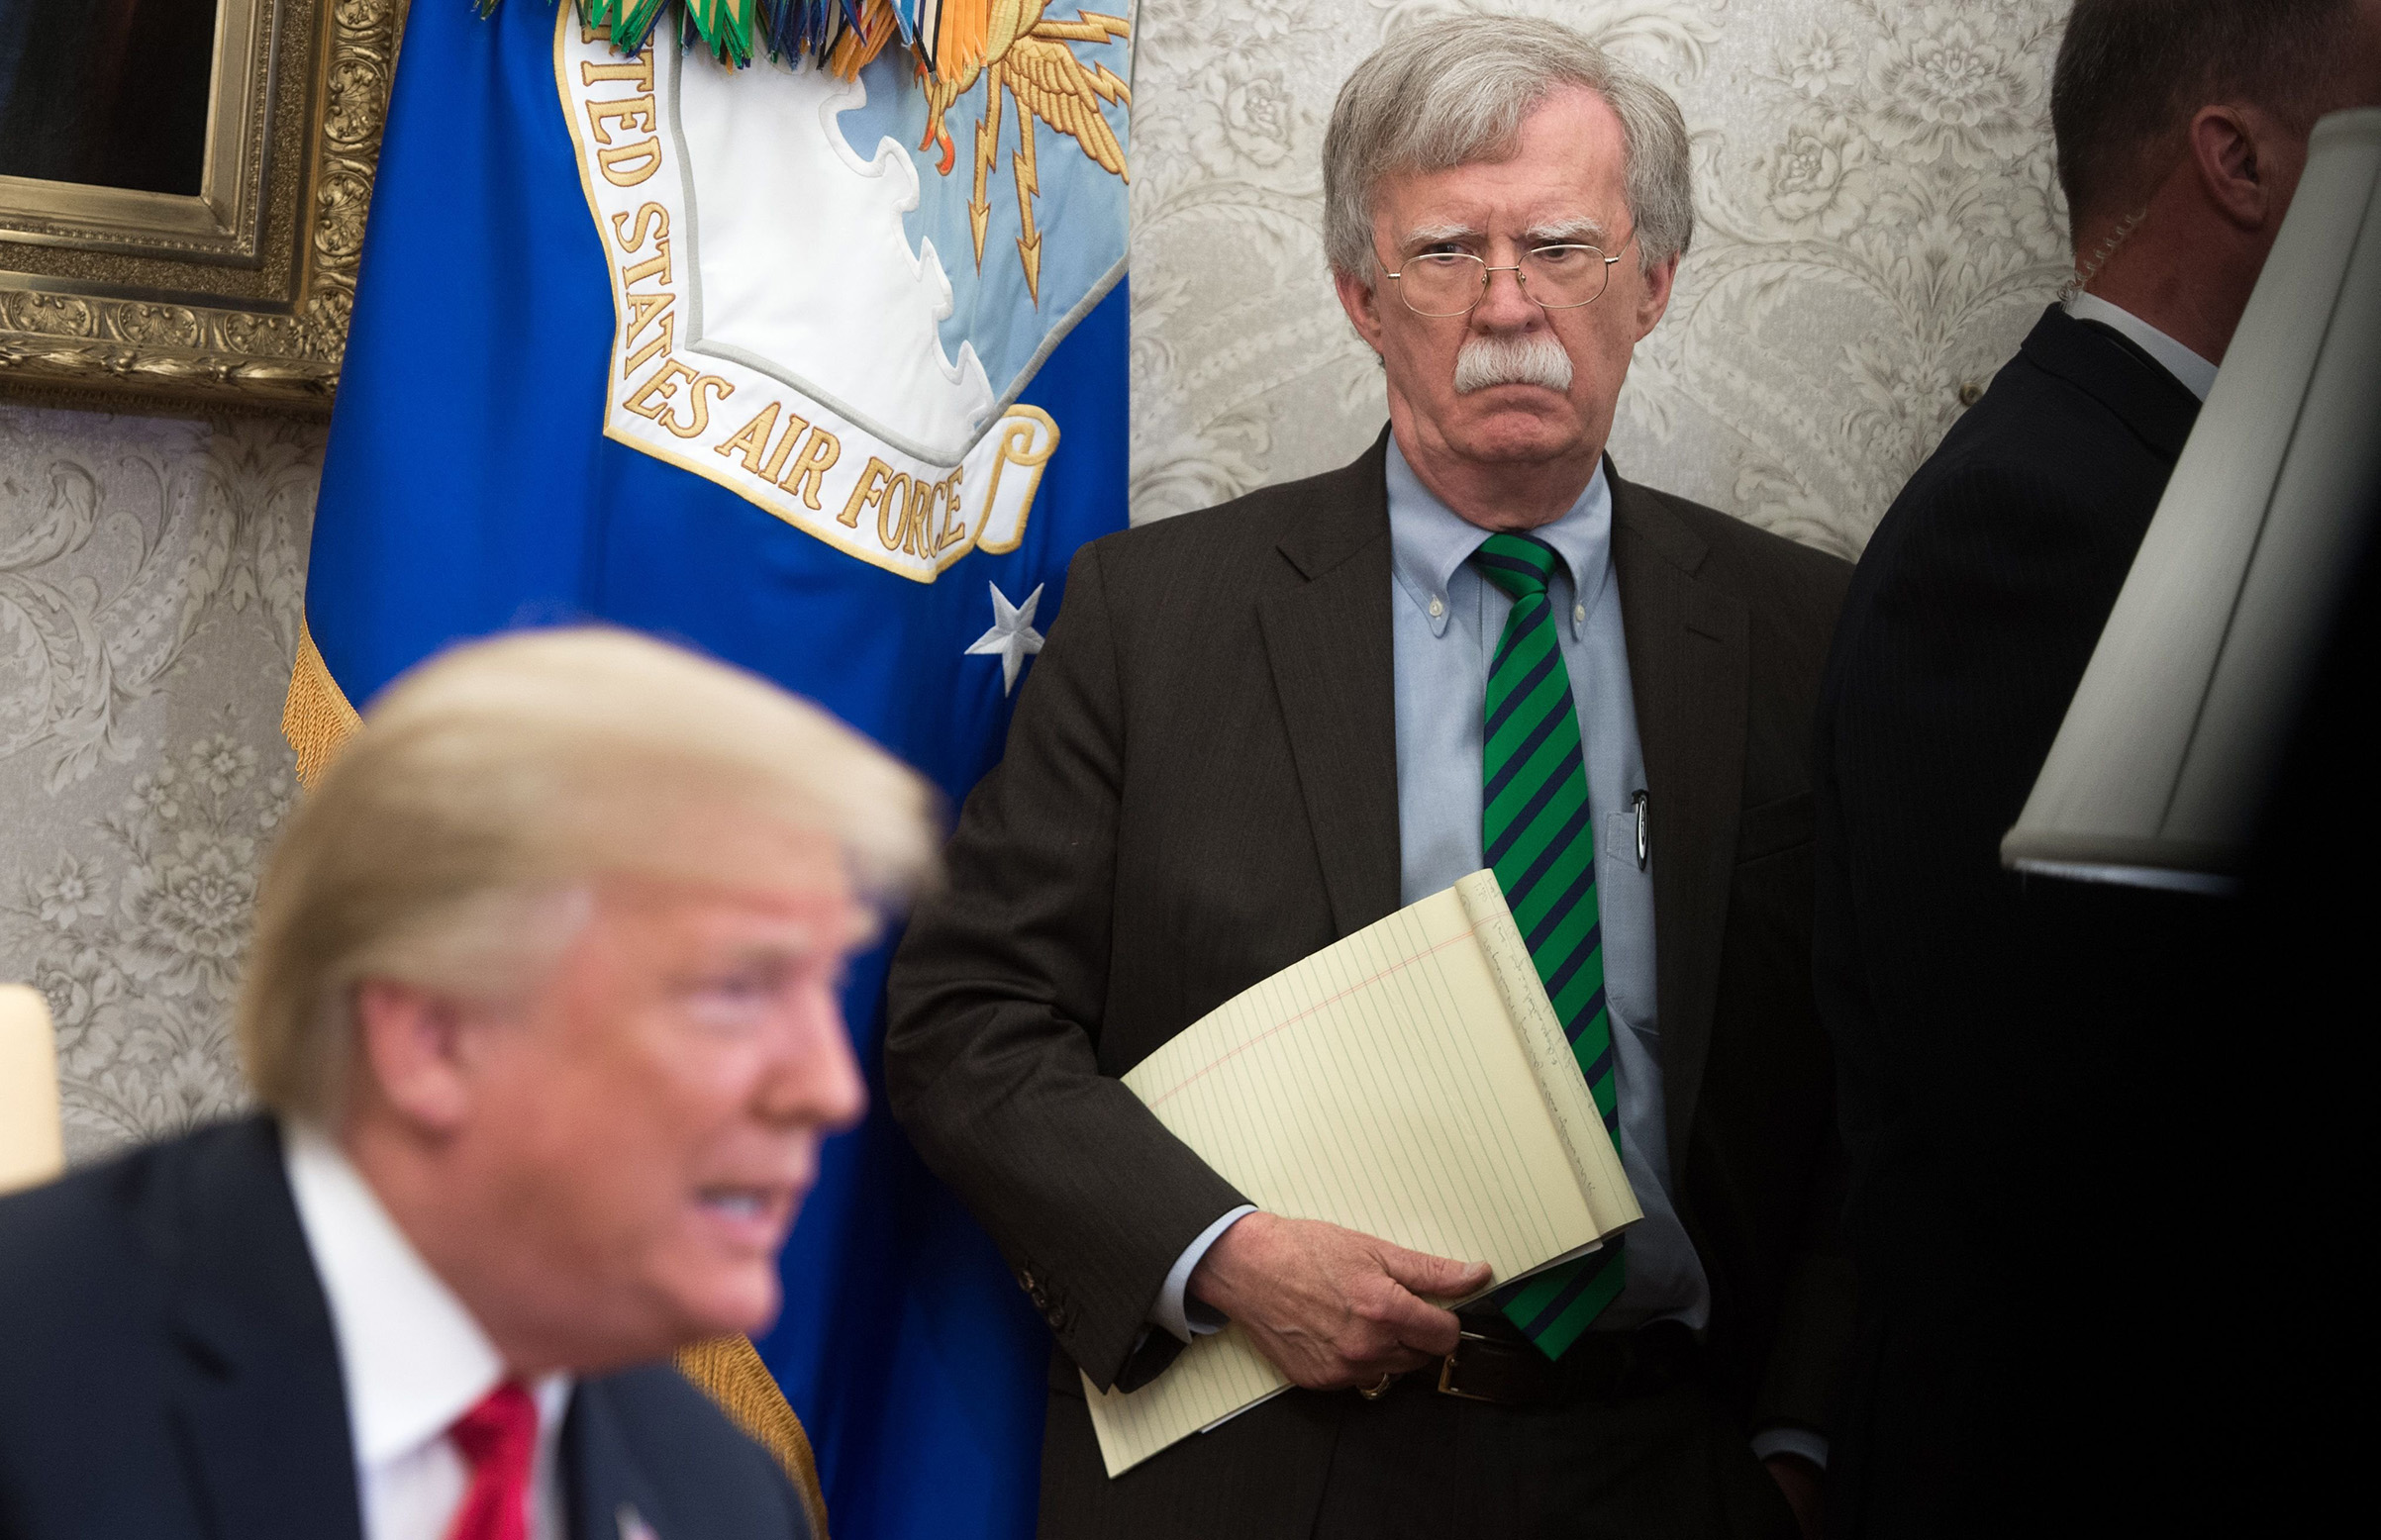 National Security Adviser John Bolton stands alongside US President Donald Trump as he speaks during a meeting with NATO Secretary General Jens Stoltenberg in the Oval Office of the White House in Washington, DC, on May 17, 2018 (SAUL LOEB—AFP/Getty Images)